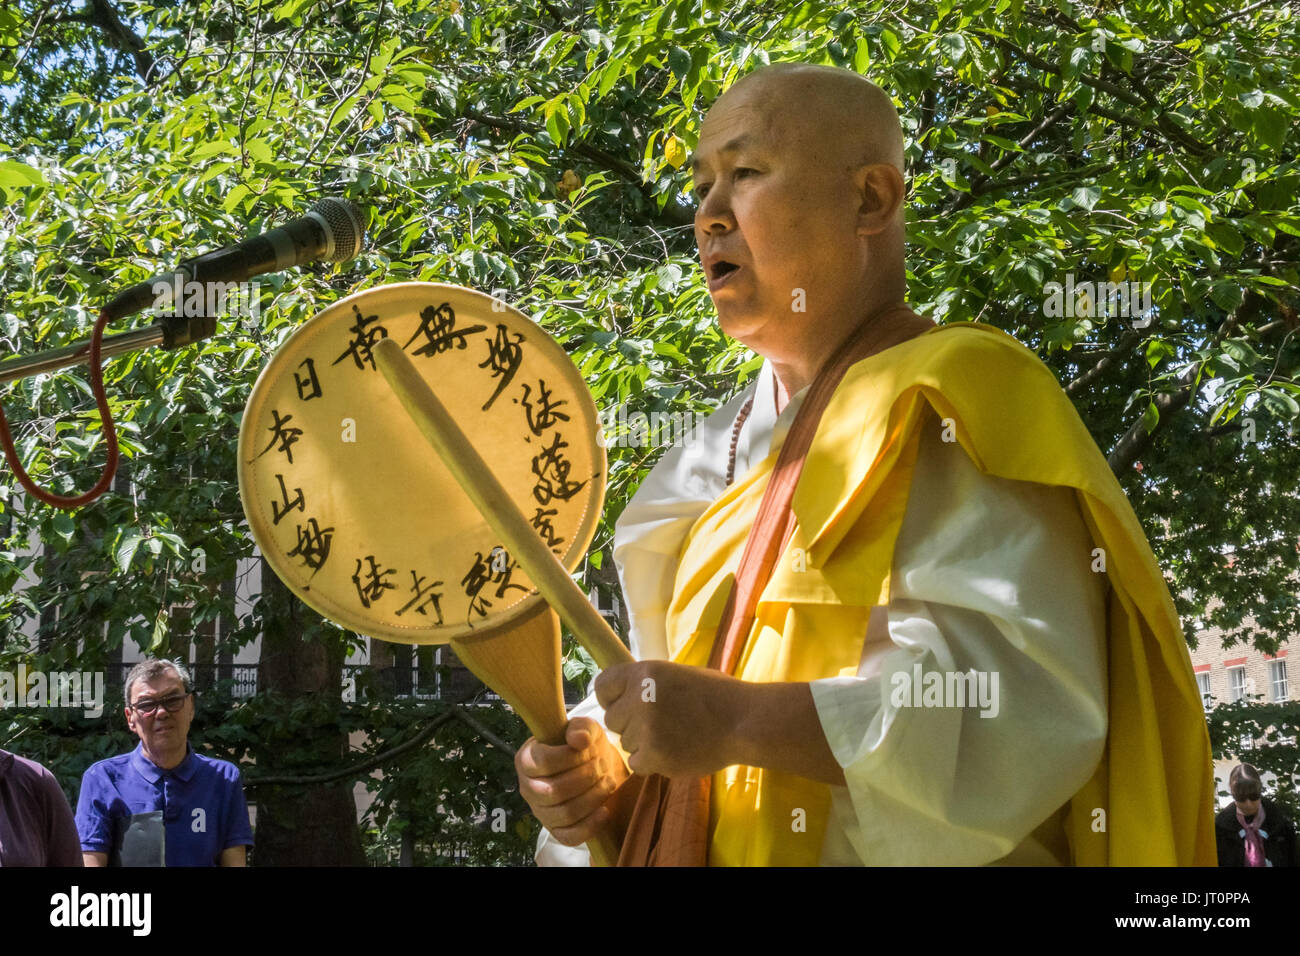 London, UK. 6th Aug, 2017. London, UK. 6th August 2017. Buddhist monk from the Battersea monastery and Peace Pagoda Reverend Gyoro Nagase recites a prayer at the London CND ceremony in memory of the victims, past and present on the 72nd anniversary of the dropping of the atomic bomb on Hiroshima and the second atomic bomb dropped on Nagasaki three days later. After a number of speeches and performances there was a minute's silence during which the Deputy Mayor of Camden and others laid flowers around the commemorative cherry tree. Peter Marshall ImagesLive (Credit Image: © Peter Marshall/Im Stock Photo